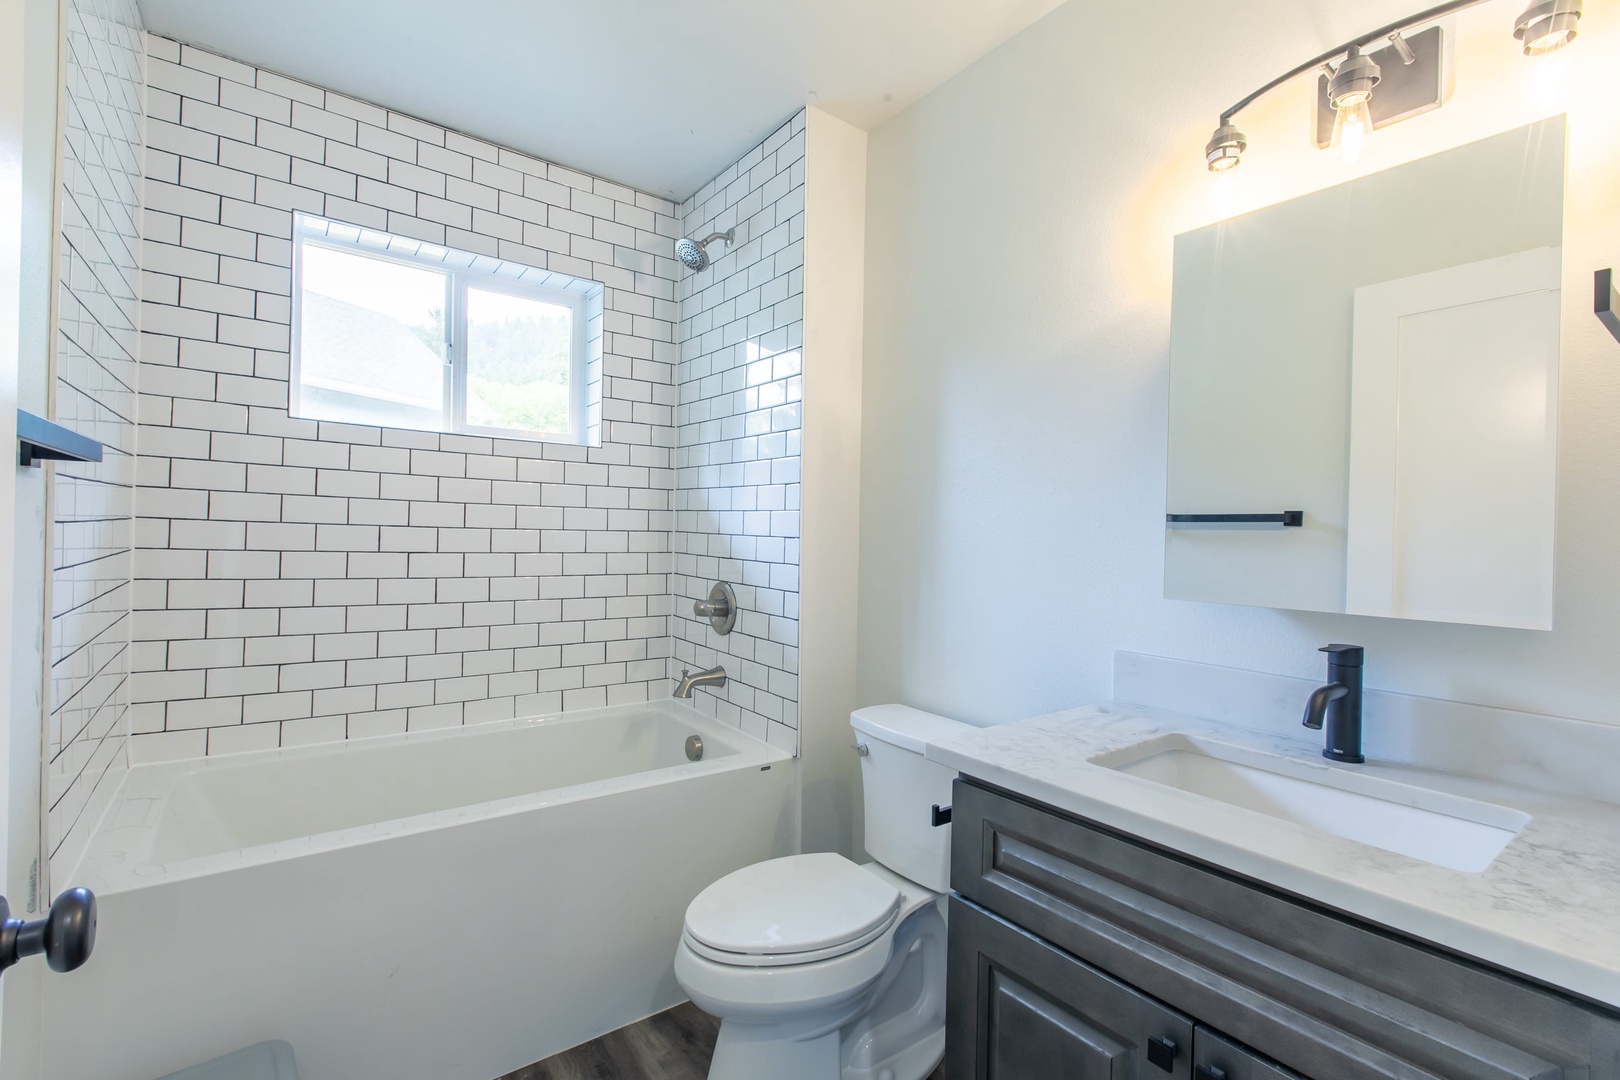 Nehalem Vacation Rentals, Nehalem Coastal Oasis - The Primary ensuite includes a tiled shower/tub combo and a sliding glass door with access to the back of the house